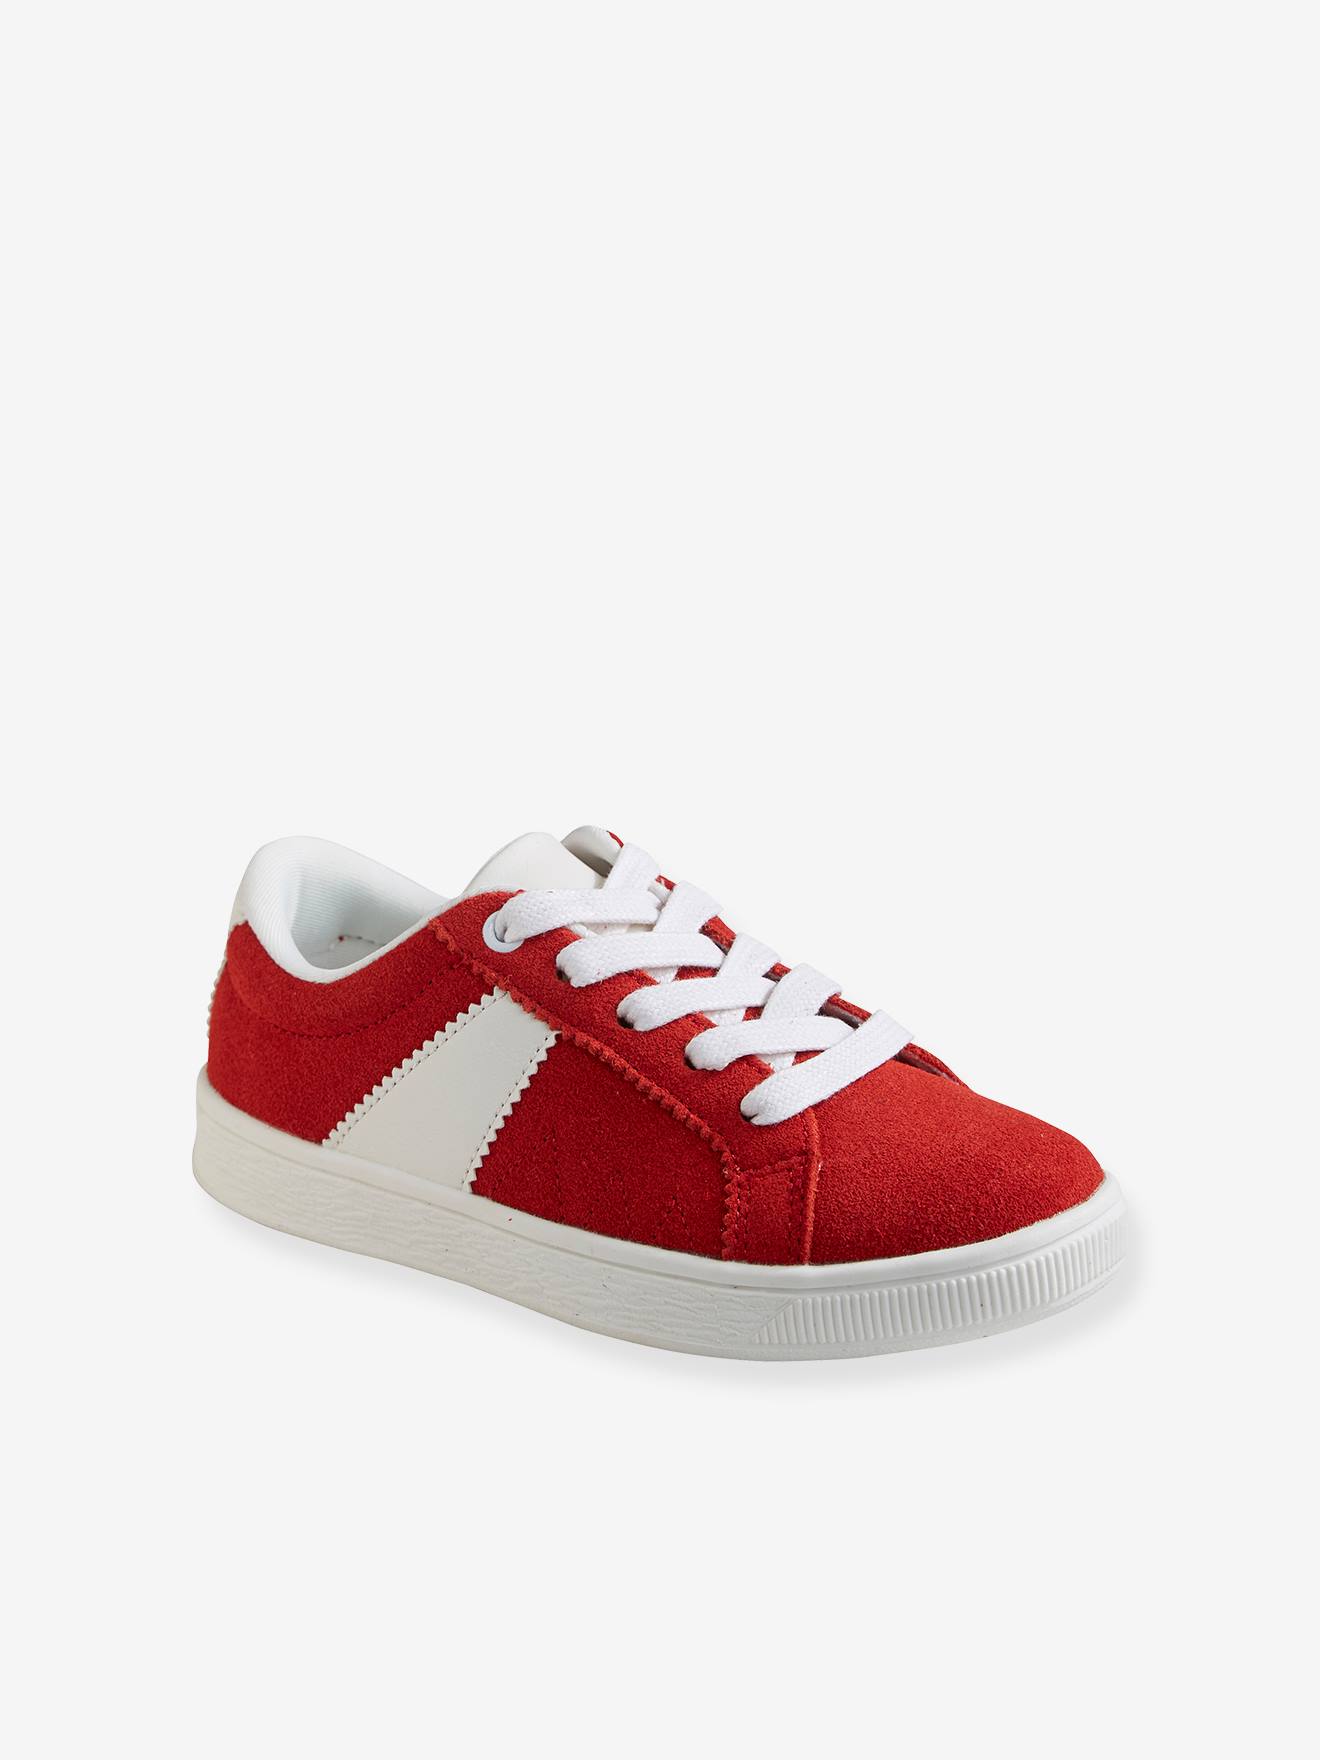 Split Leather Trainers for Boys - red 